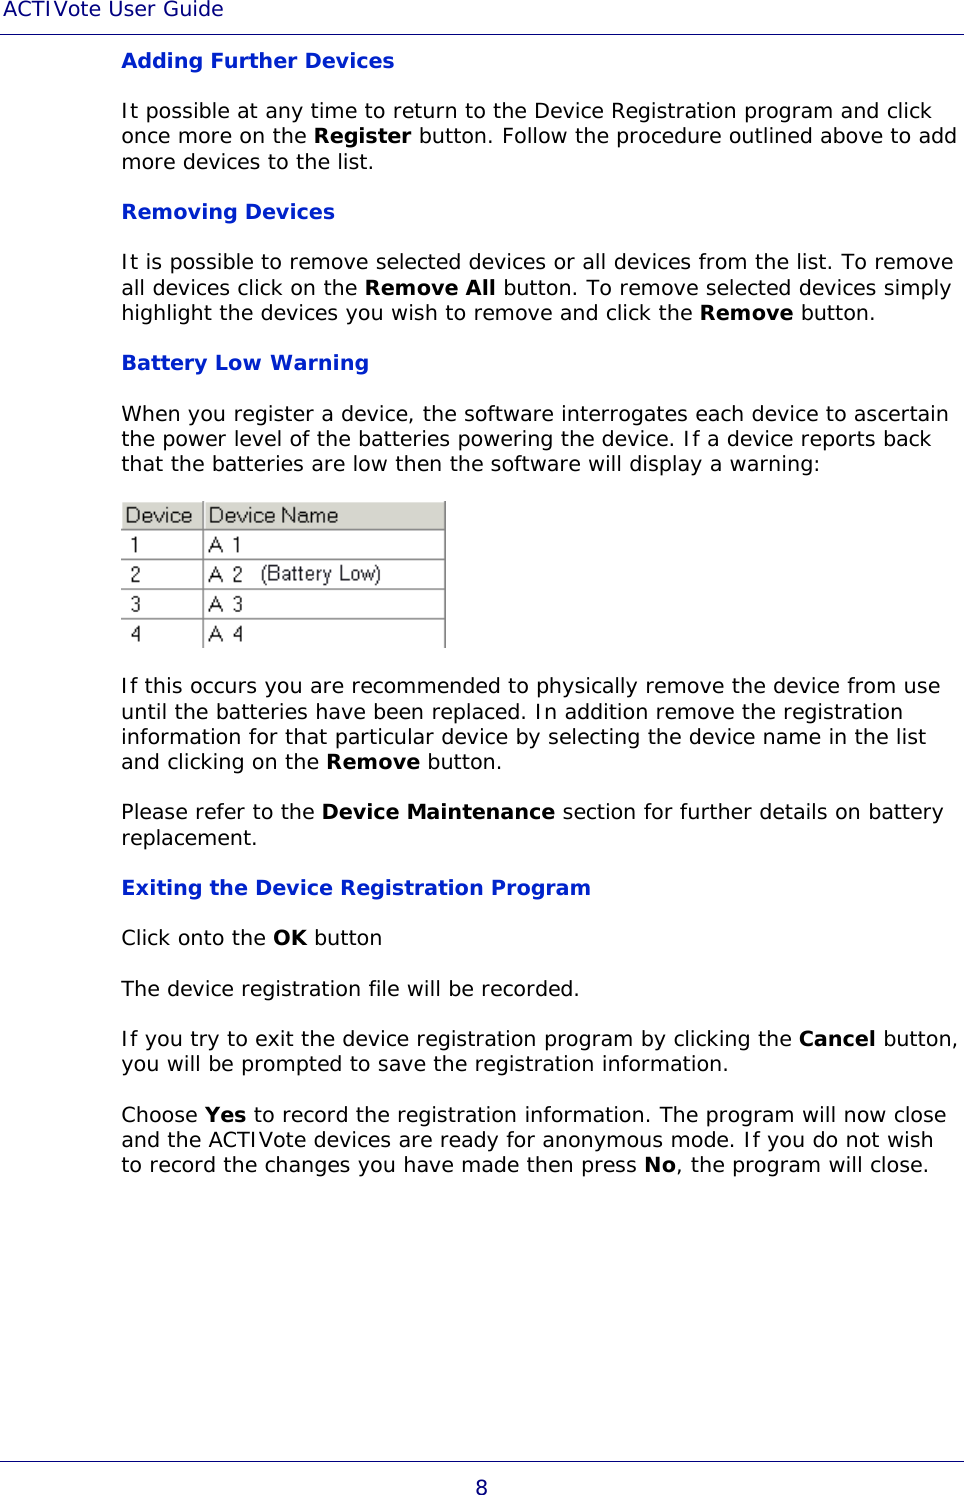 ACTIVote User Guide 8 Adding Further Devices It possible at any time to return to the Device Registration program and click once more on the Register button. Follow the procedure outlined above to add more devices to the list. Removing Devices It is possible to remove selected devices or all devices from the list. To remove all devices click on the Remove All button. To remove selected devices simply highlight the devices you wish to remove and click the Remove button.  Battery Low Warning When you register a device, the software interrogates each device to ascertain the power level of the batteries powering the device. If a device reports back that the batteries are low then the software will display a warning:  If this occurs you are recommended to physically remove the device from use until the batteries have been replaced. In addition remove the registration information for that particular device by selecting the device name in the list and clicking on the Remove button.  Please refer to the Device Maintenance section for further details on battery replacement. Exiting the Device Registration Program Click onto the OK button The device registration file will be recorded. If you try to exit the device registration program by clicking the Cancel button, you will be prompted to save the registration information. Choose Yes to record the registration information. The program will now close and the ACTIVote devices are ready for anonymous mode. If you do not wish to record the changes you have made then press No, the program will close. 